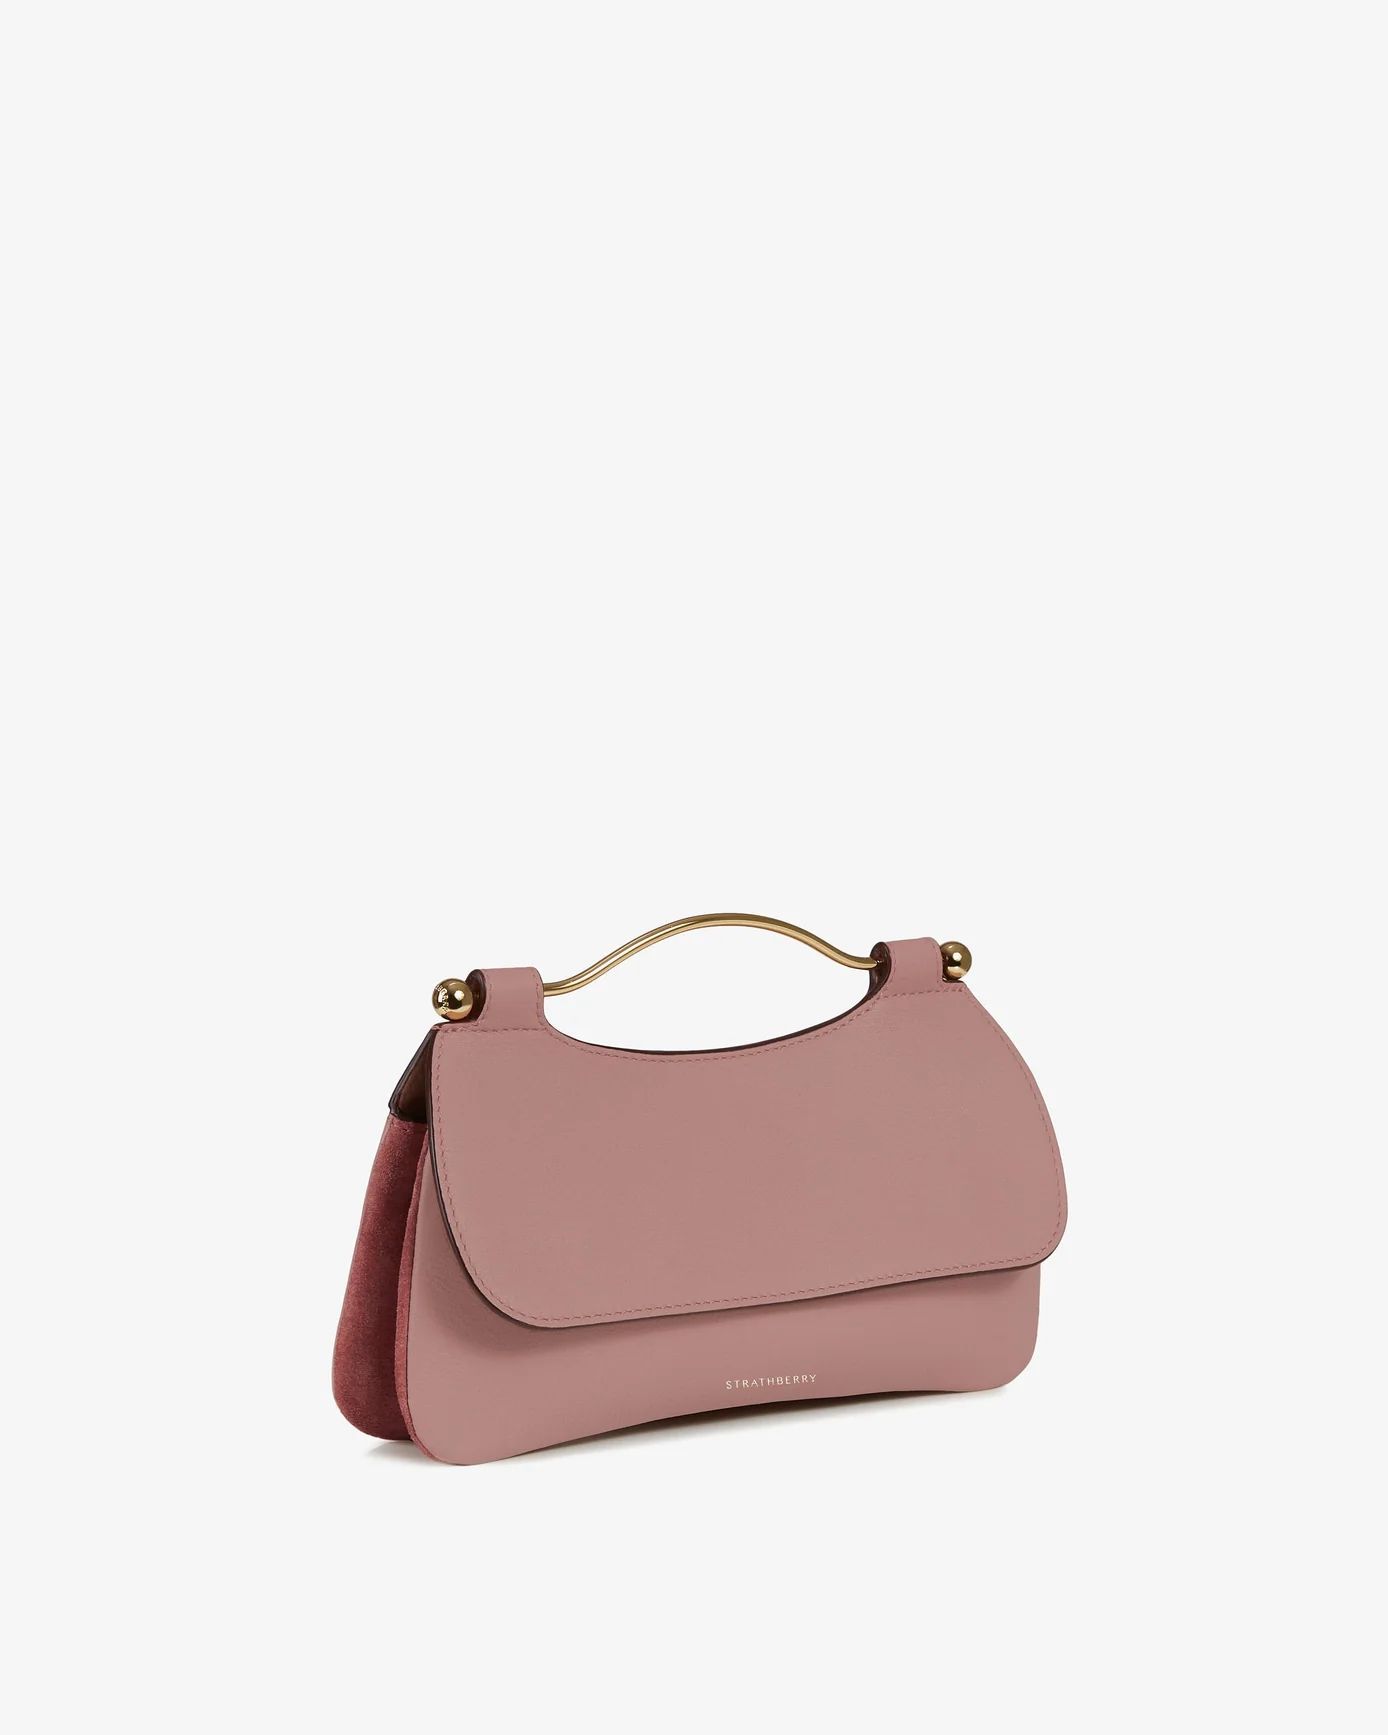 Harmony - Leather/Suede Blush Rose/Dusty Pink | Strathberry